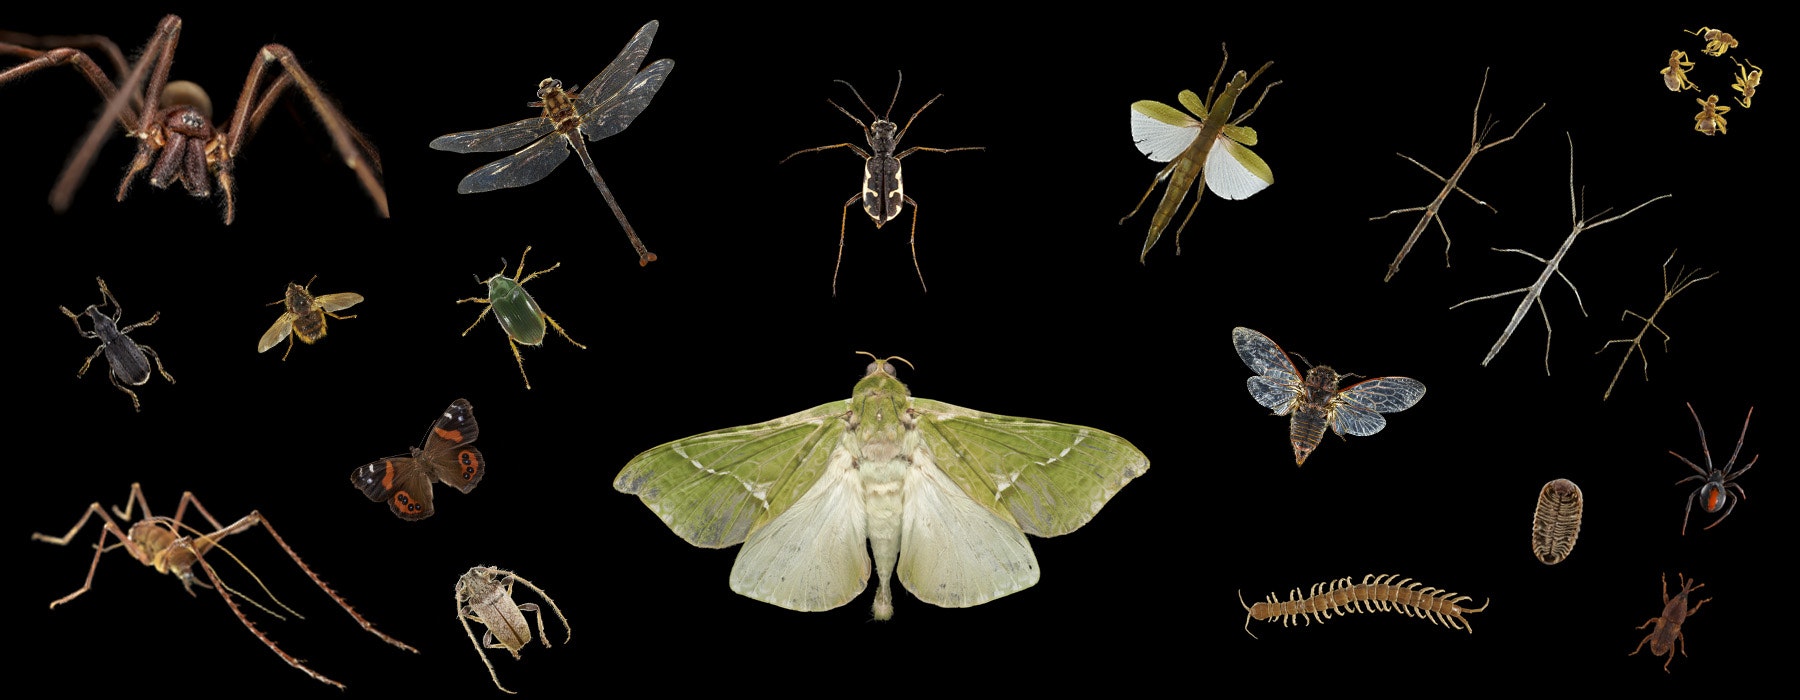 18 types of bugs and insects on a black background